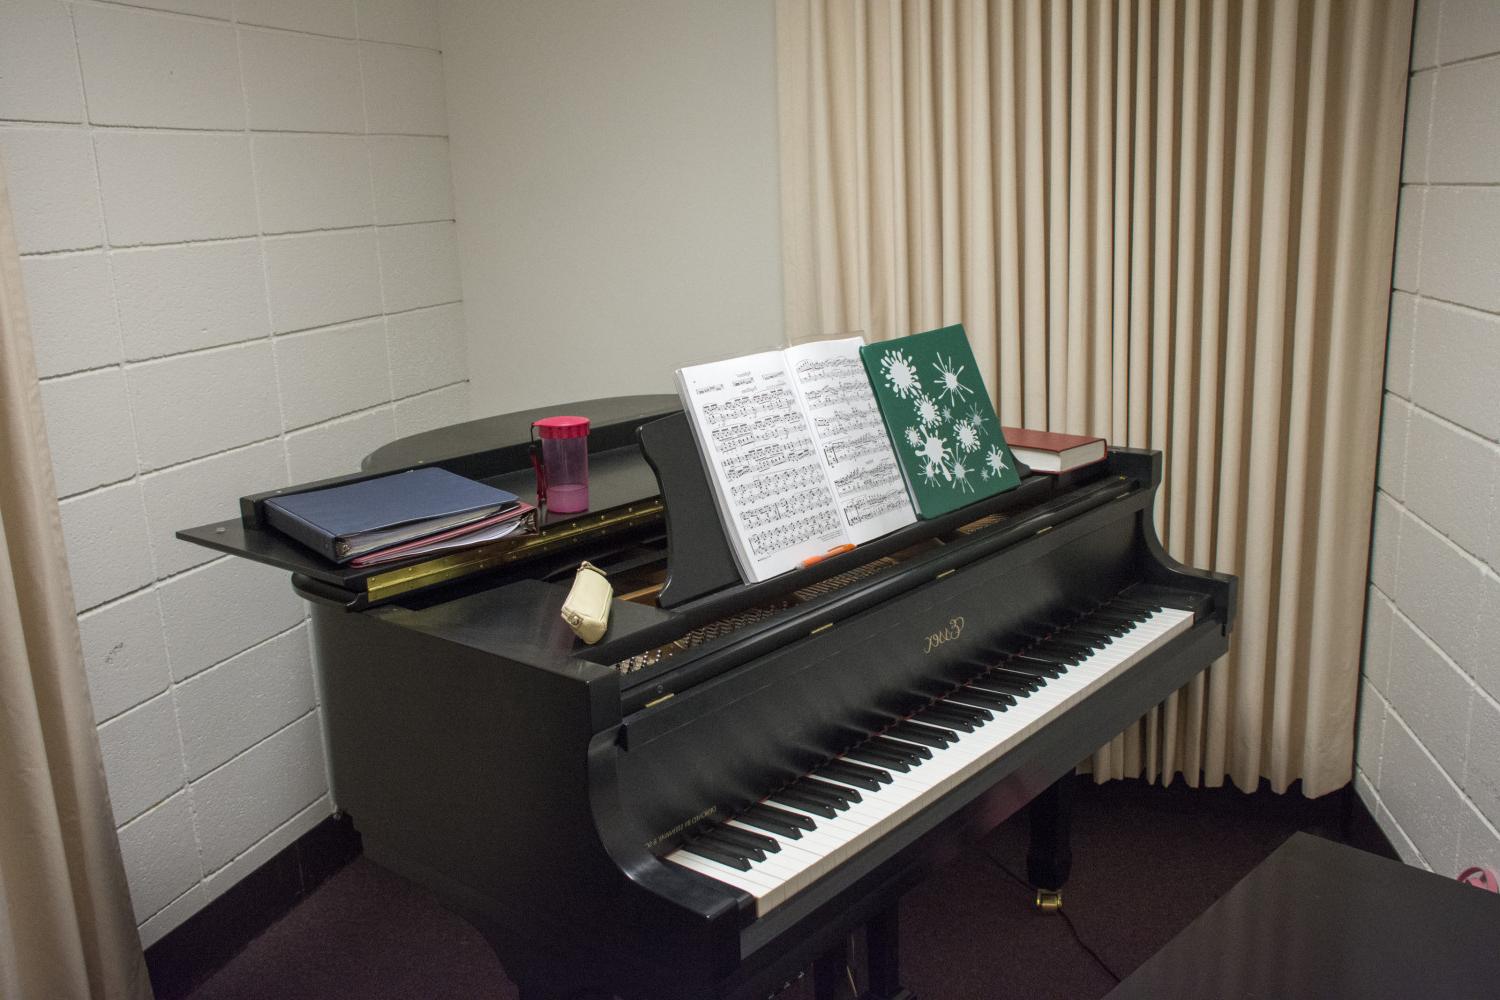 One of the Practice Rooms in the H. F. 约翰逊艺术中心.